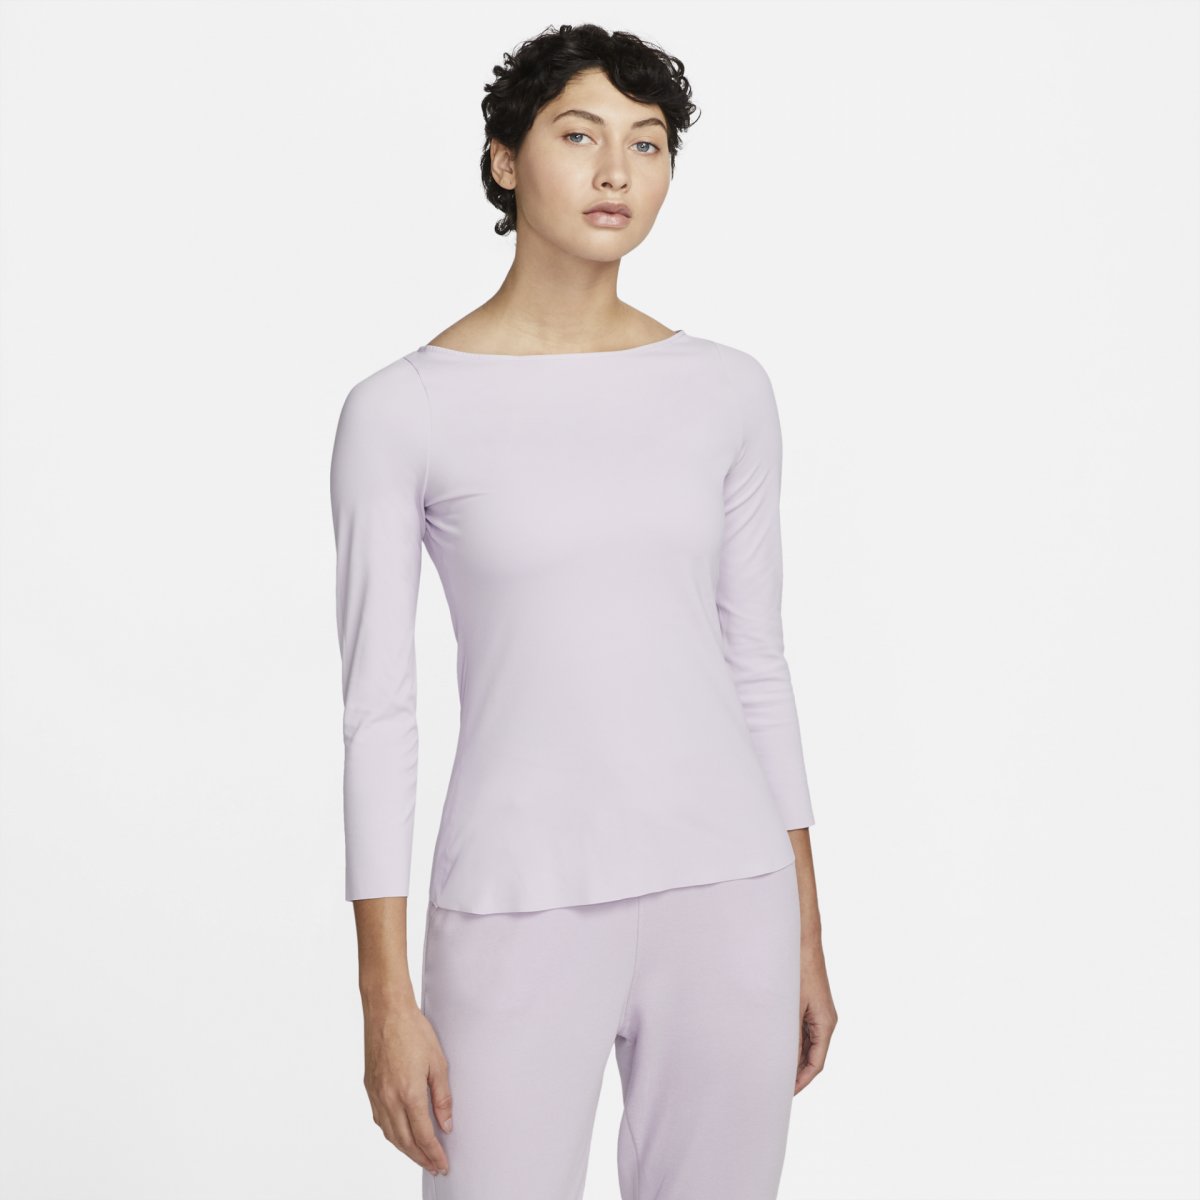 Nike Yoga Luxe Long-Sleeve Fioletowy M